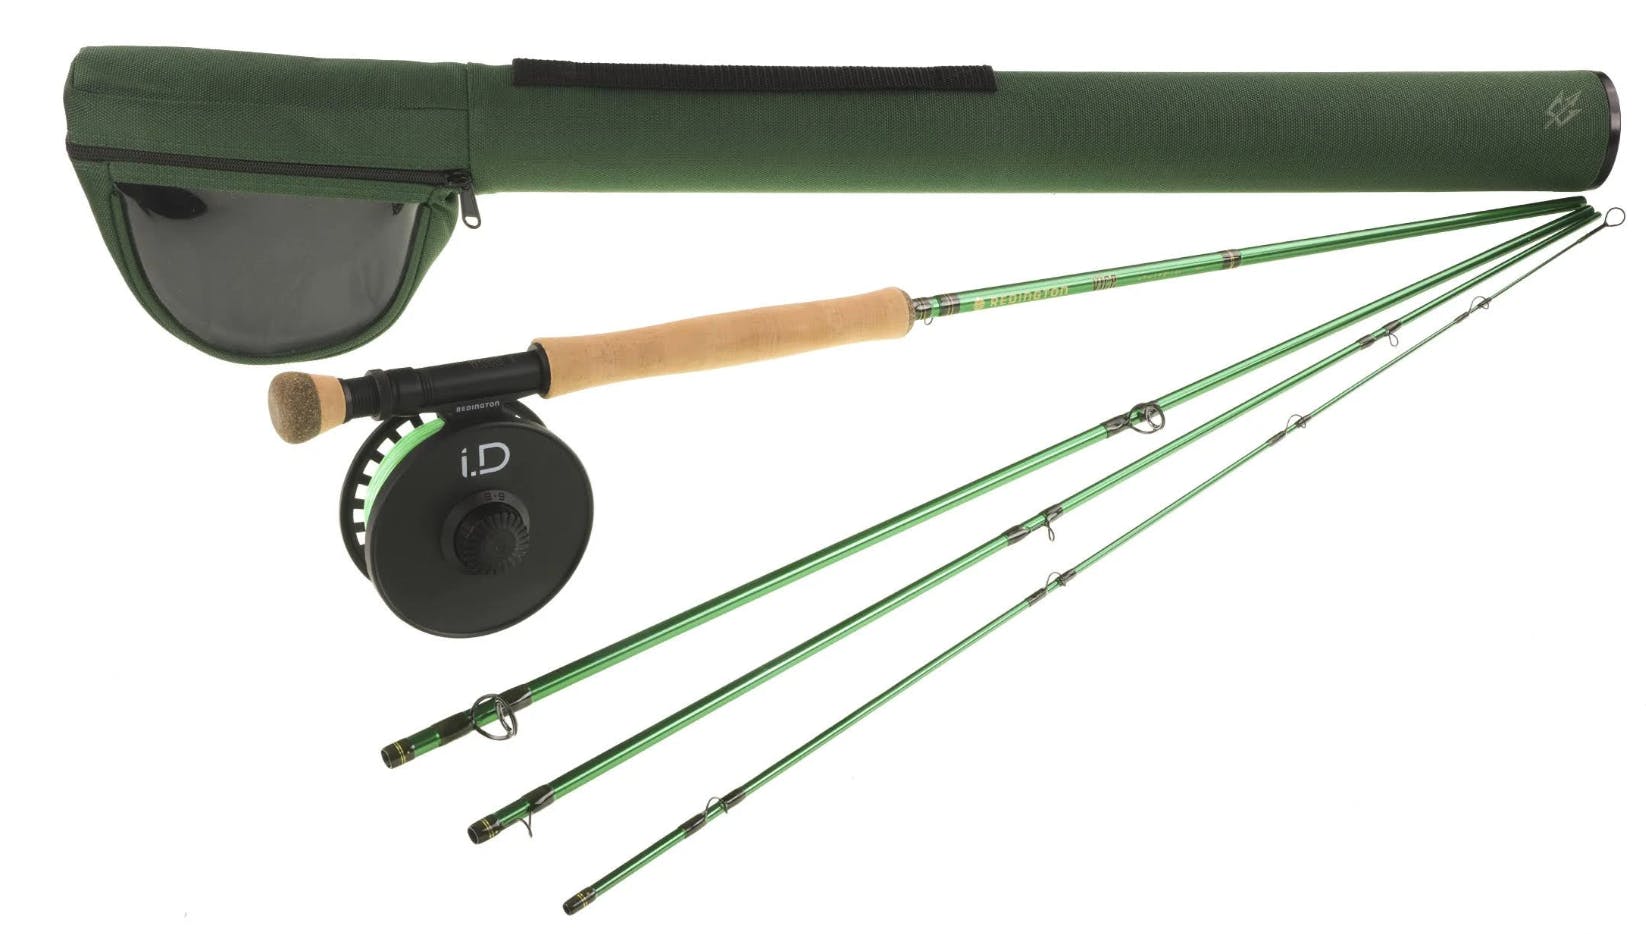 The Best Fly Fishing Rods for Beginners